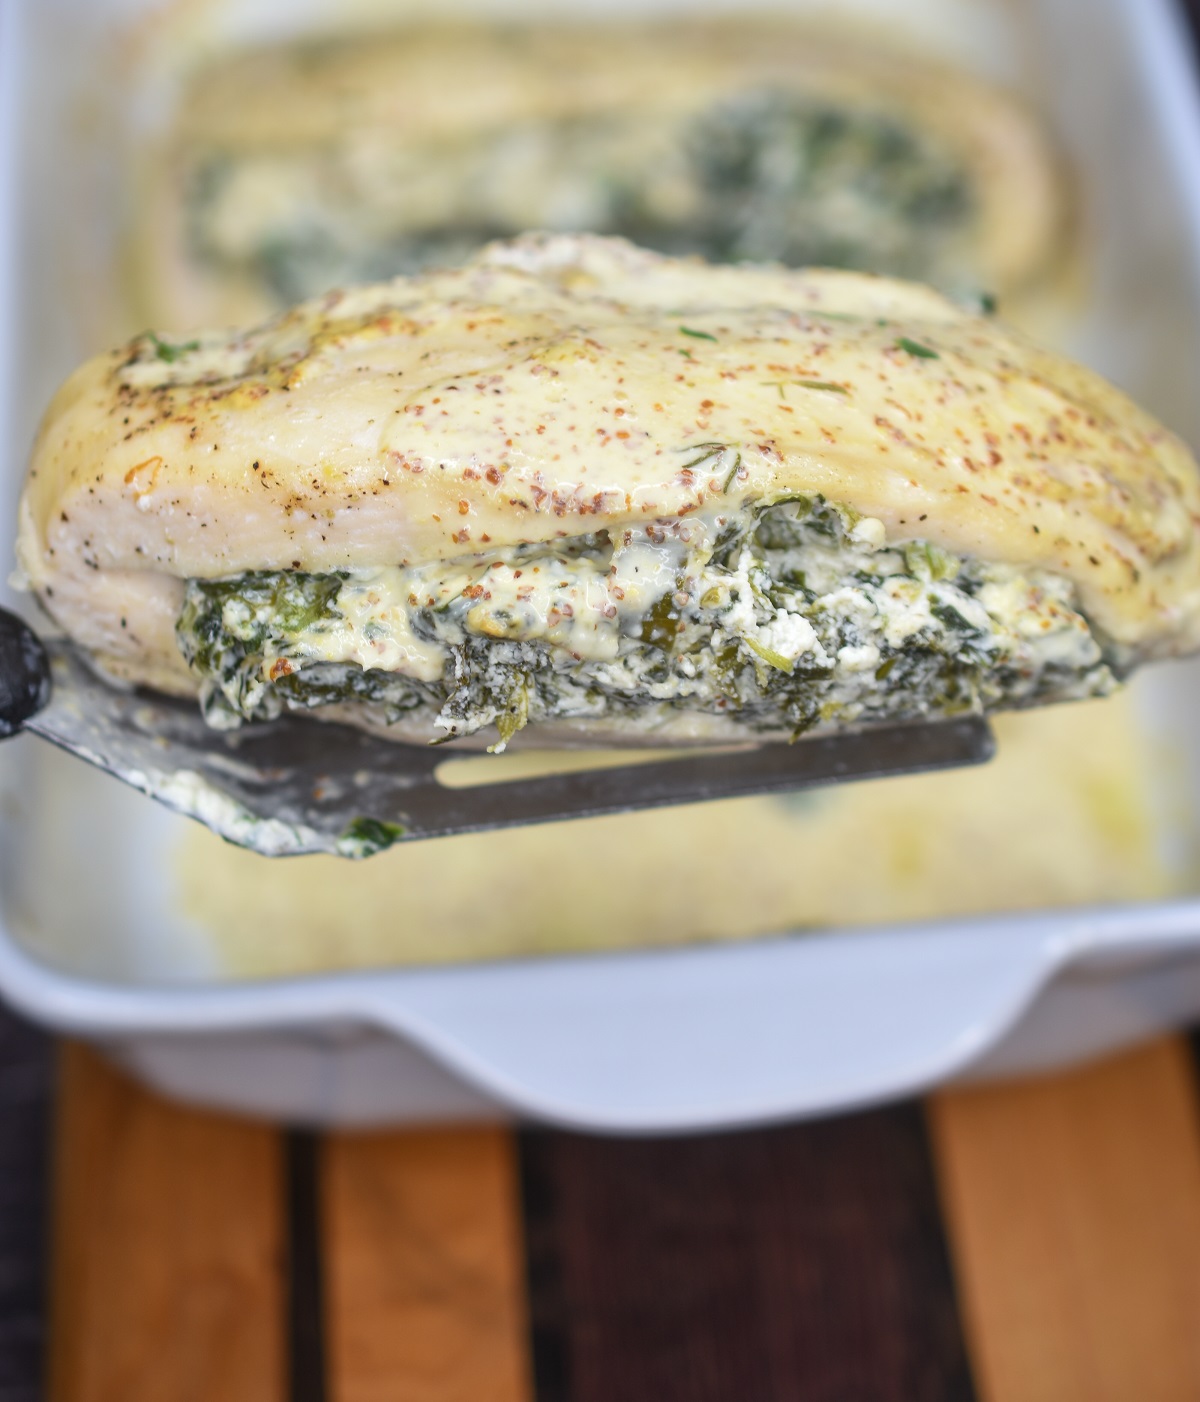 Cream Cheese and Spinach Stuffed Chicken Breasts. Low carb recipe friendly.